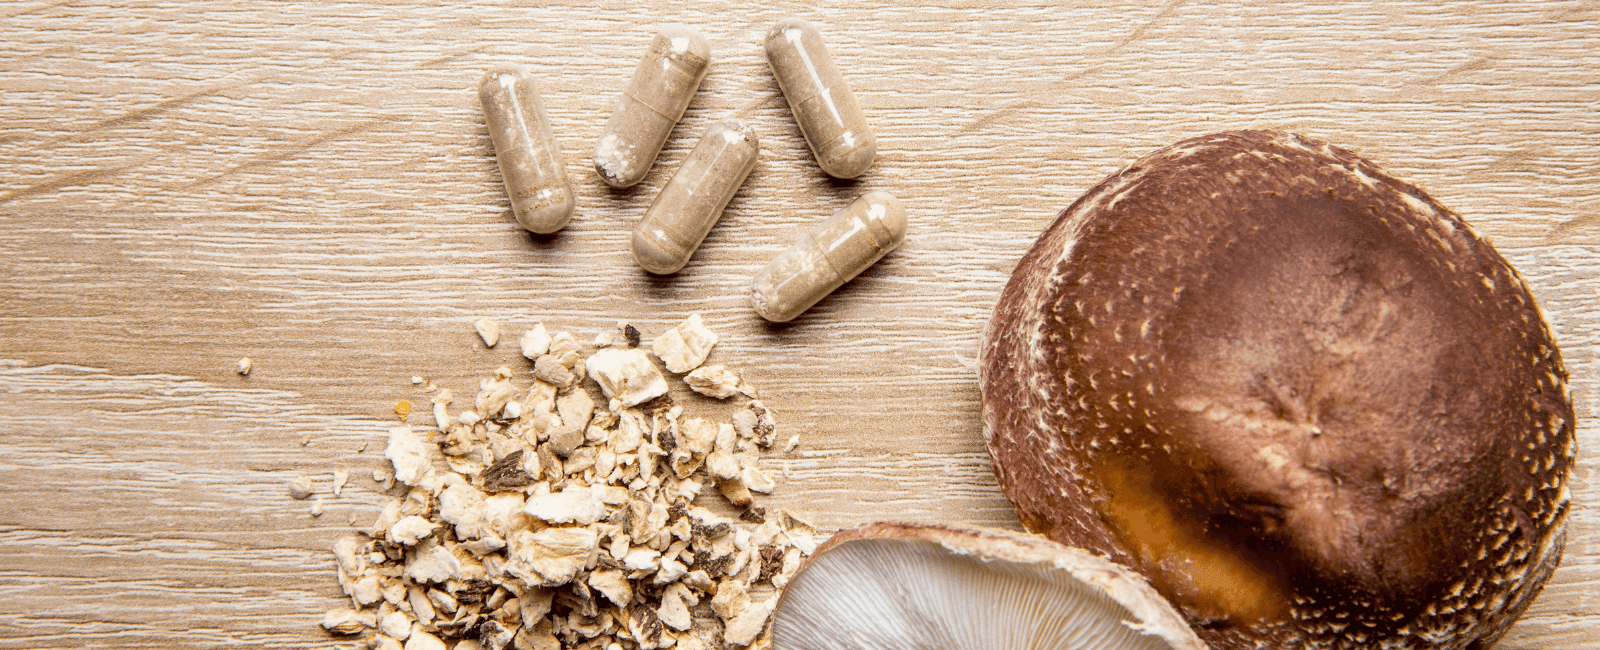 How to "Stack" Mushrooms in a Supplement Routine